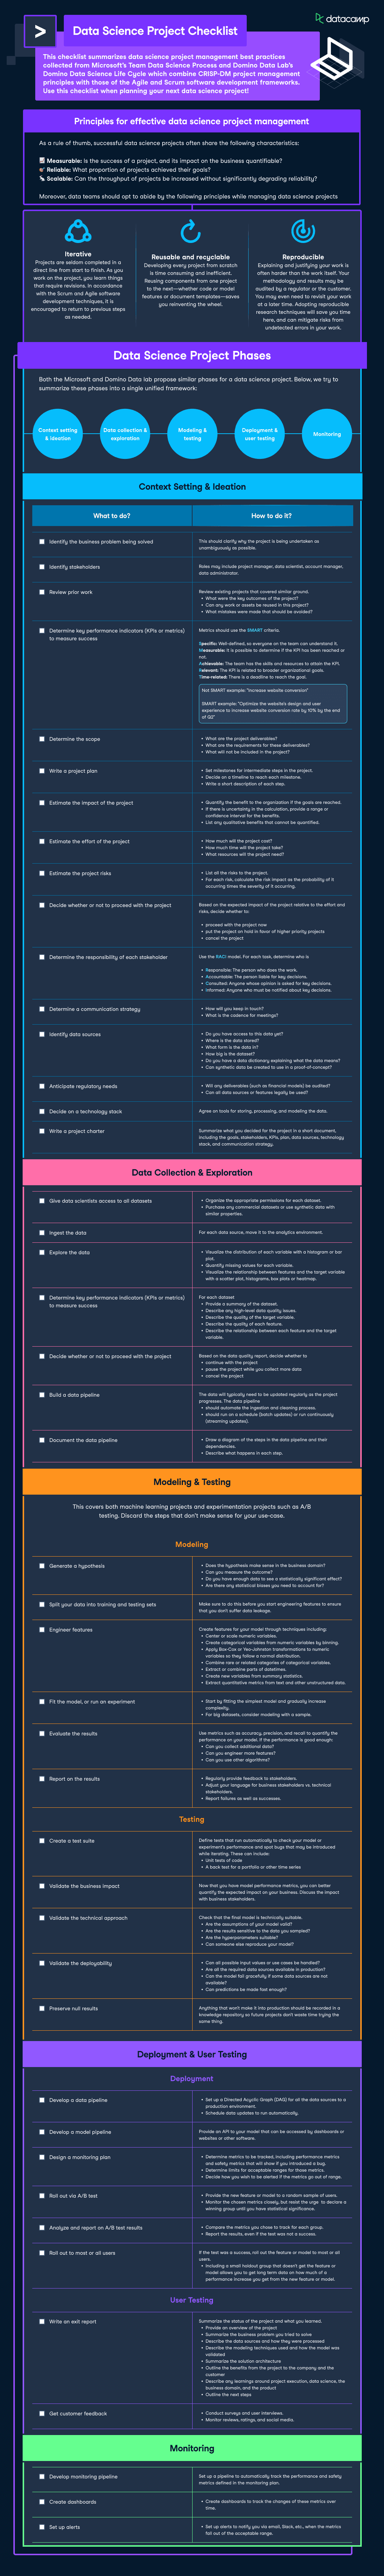 Data Cleaning Checklist@1x (1).png